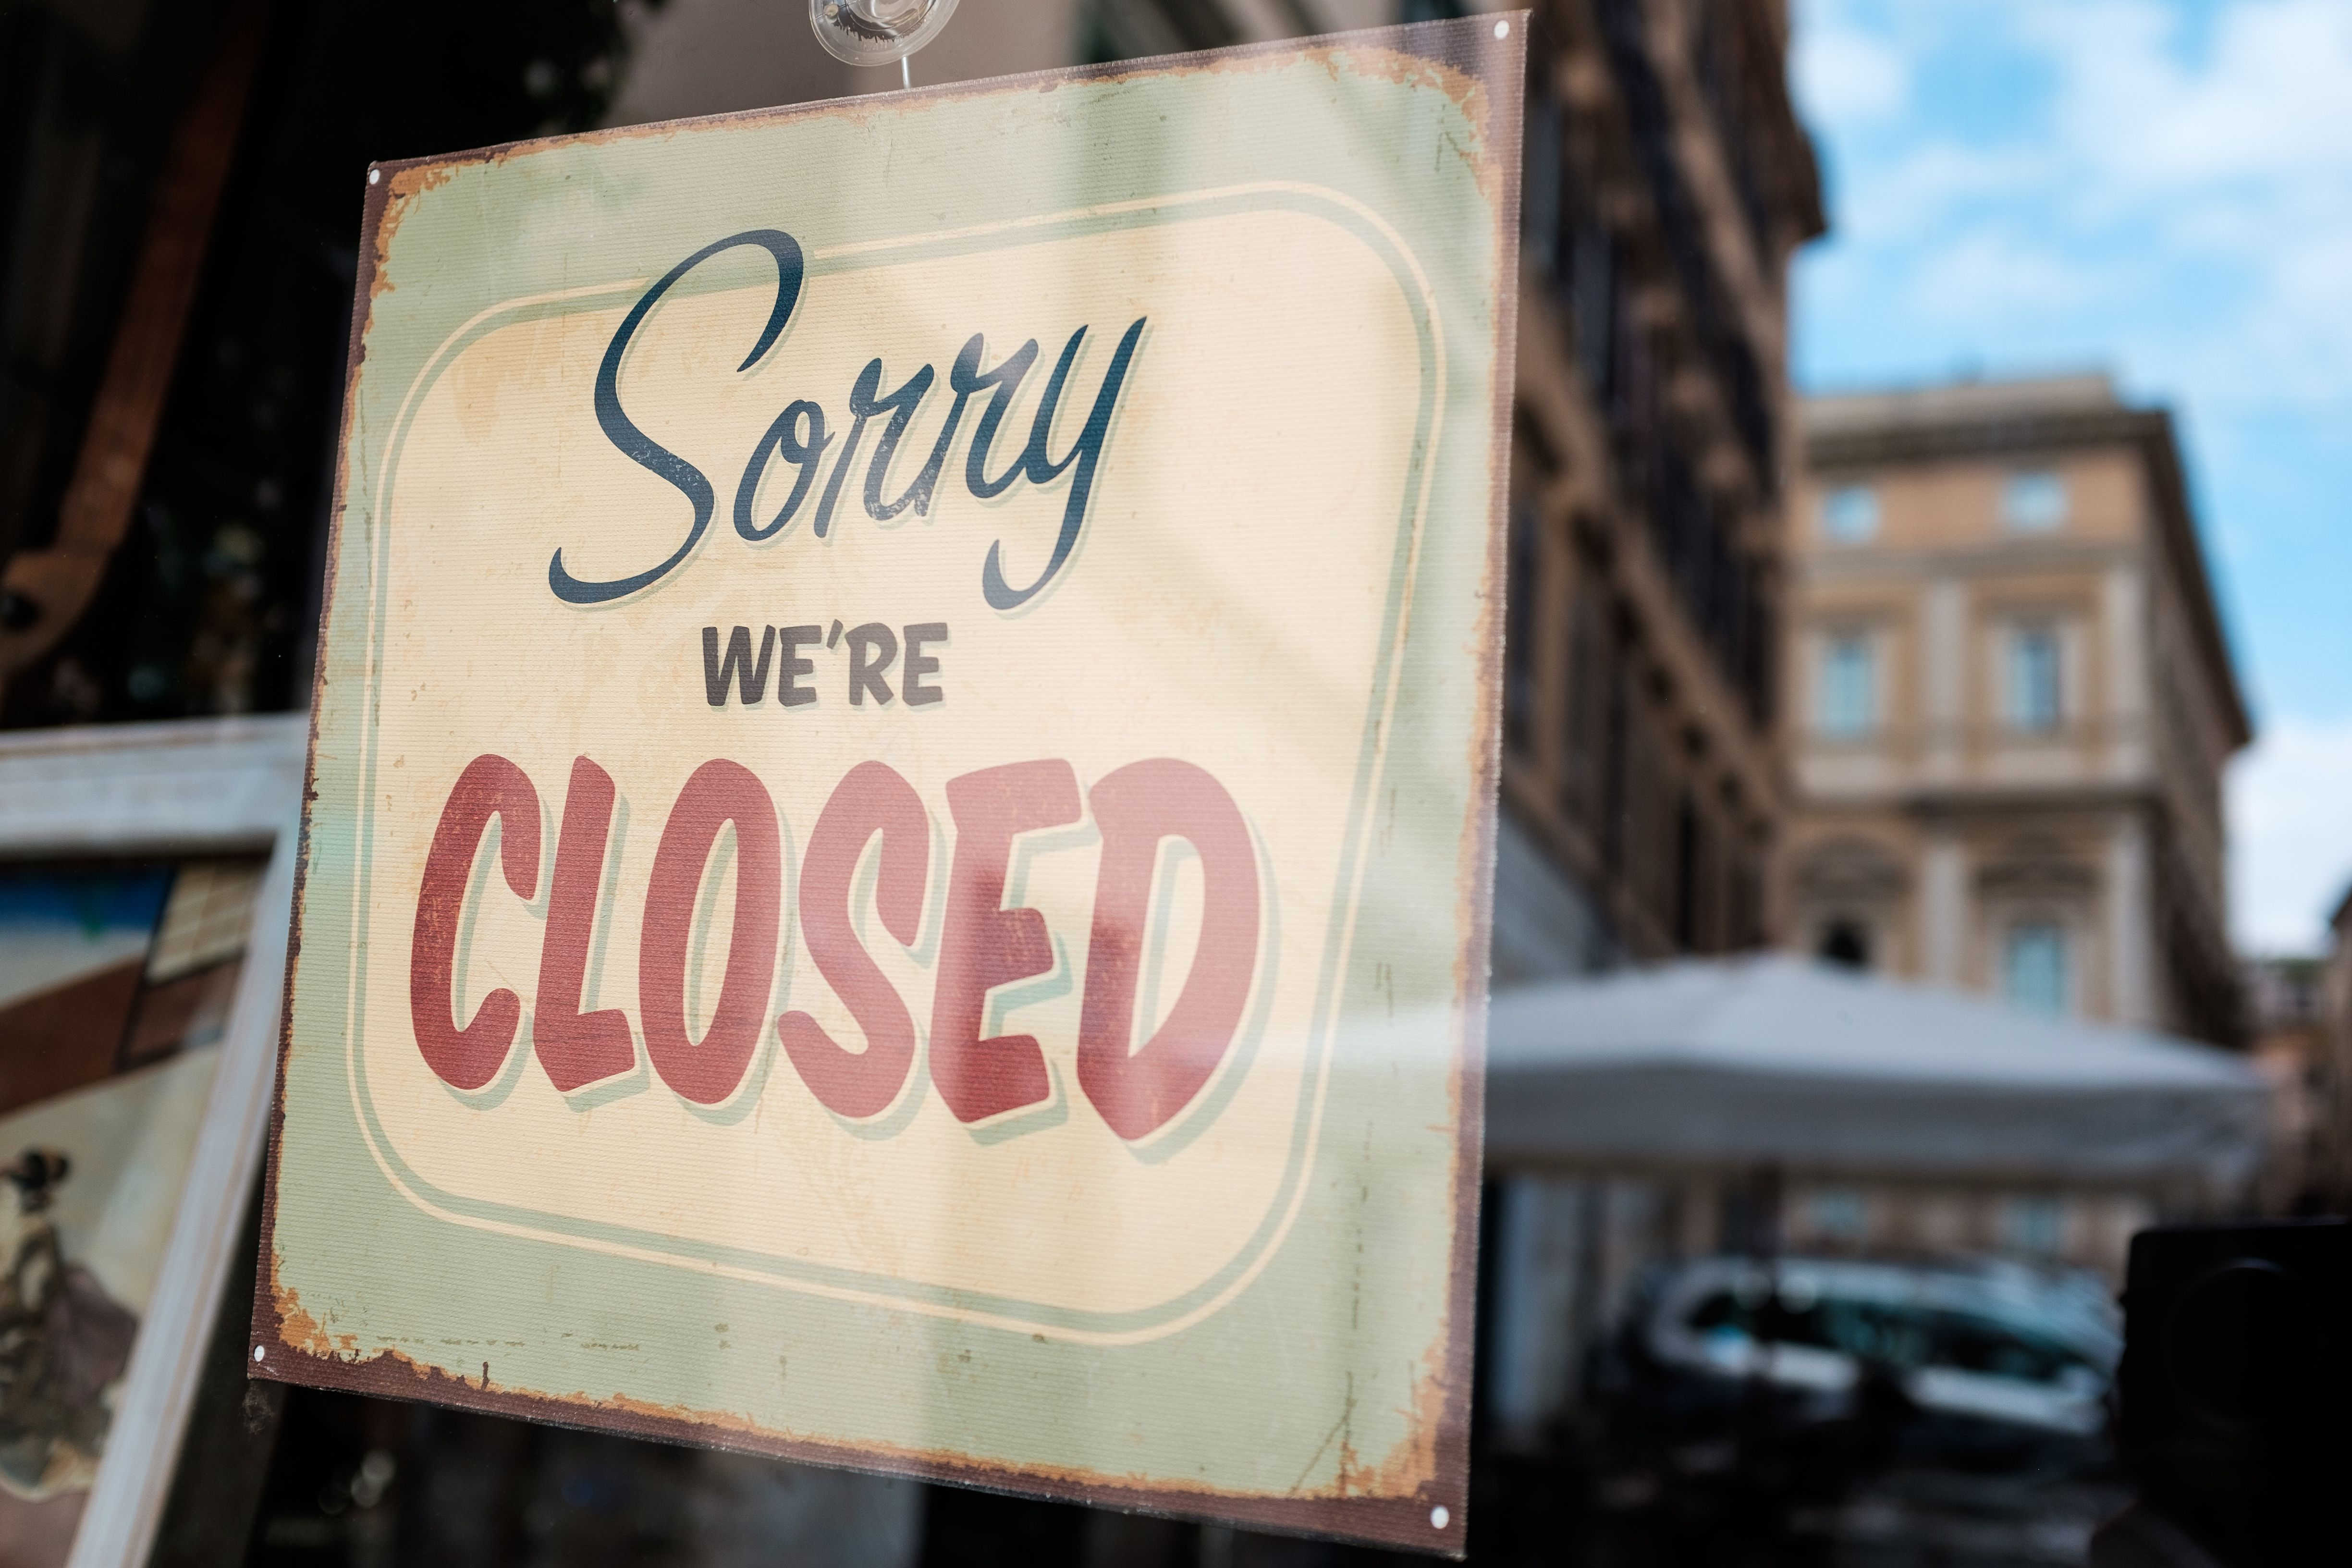 A sign showing closure of a business.